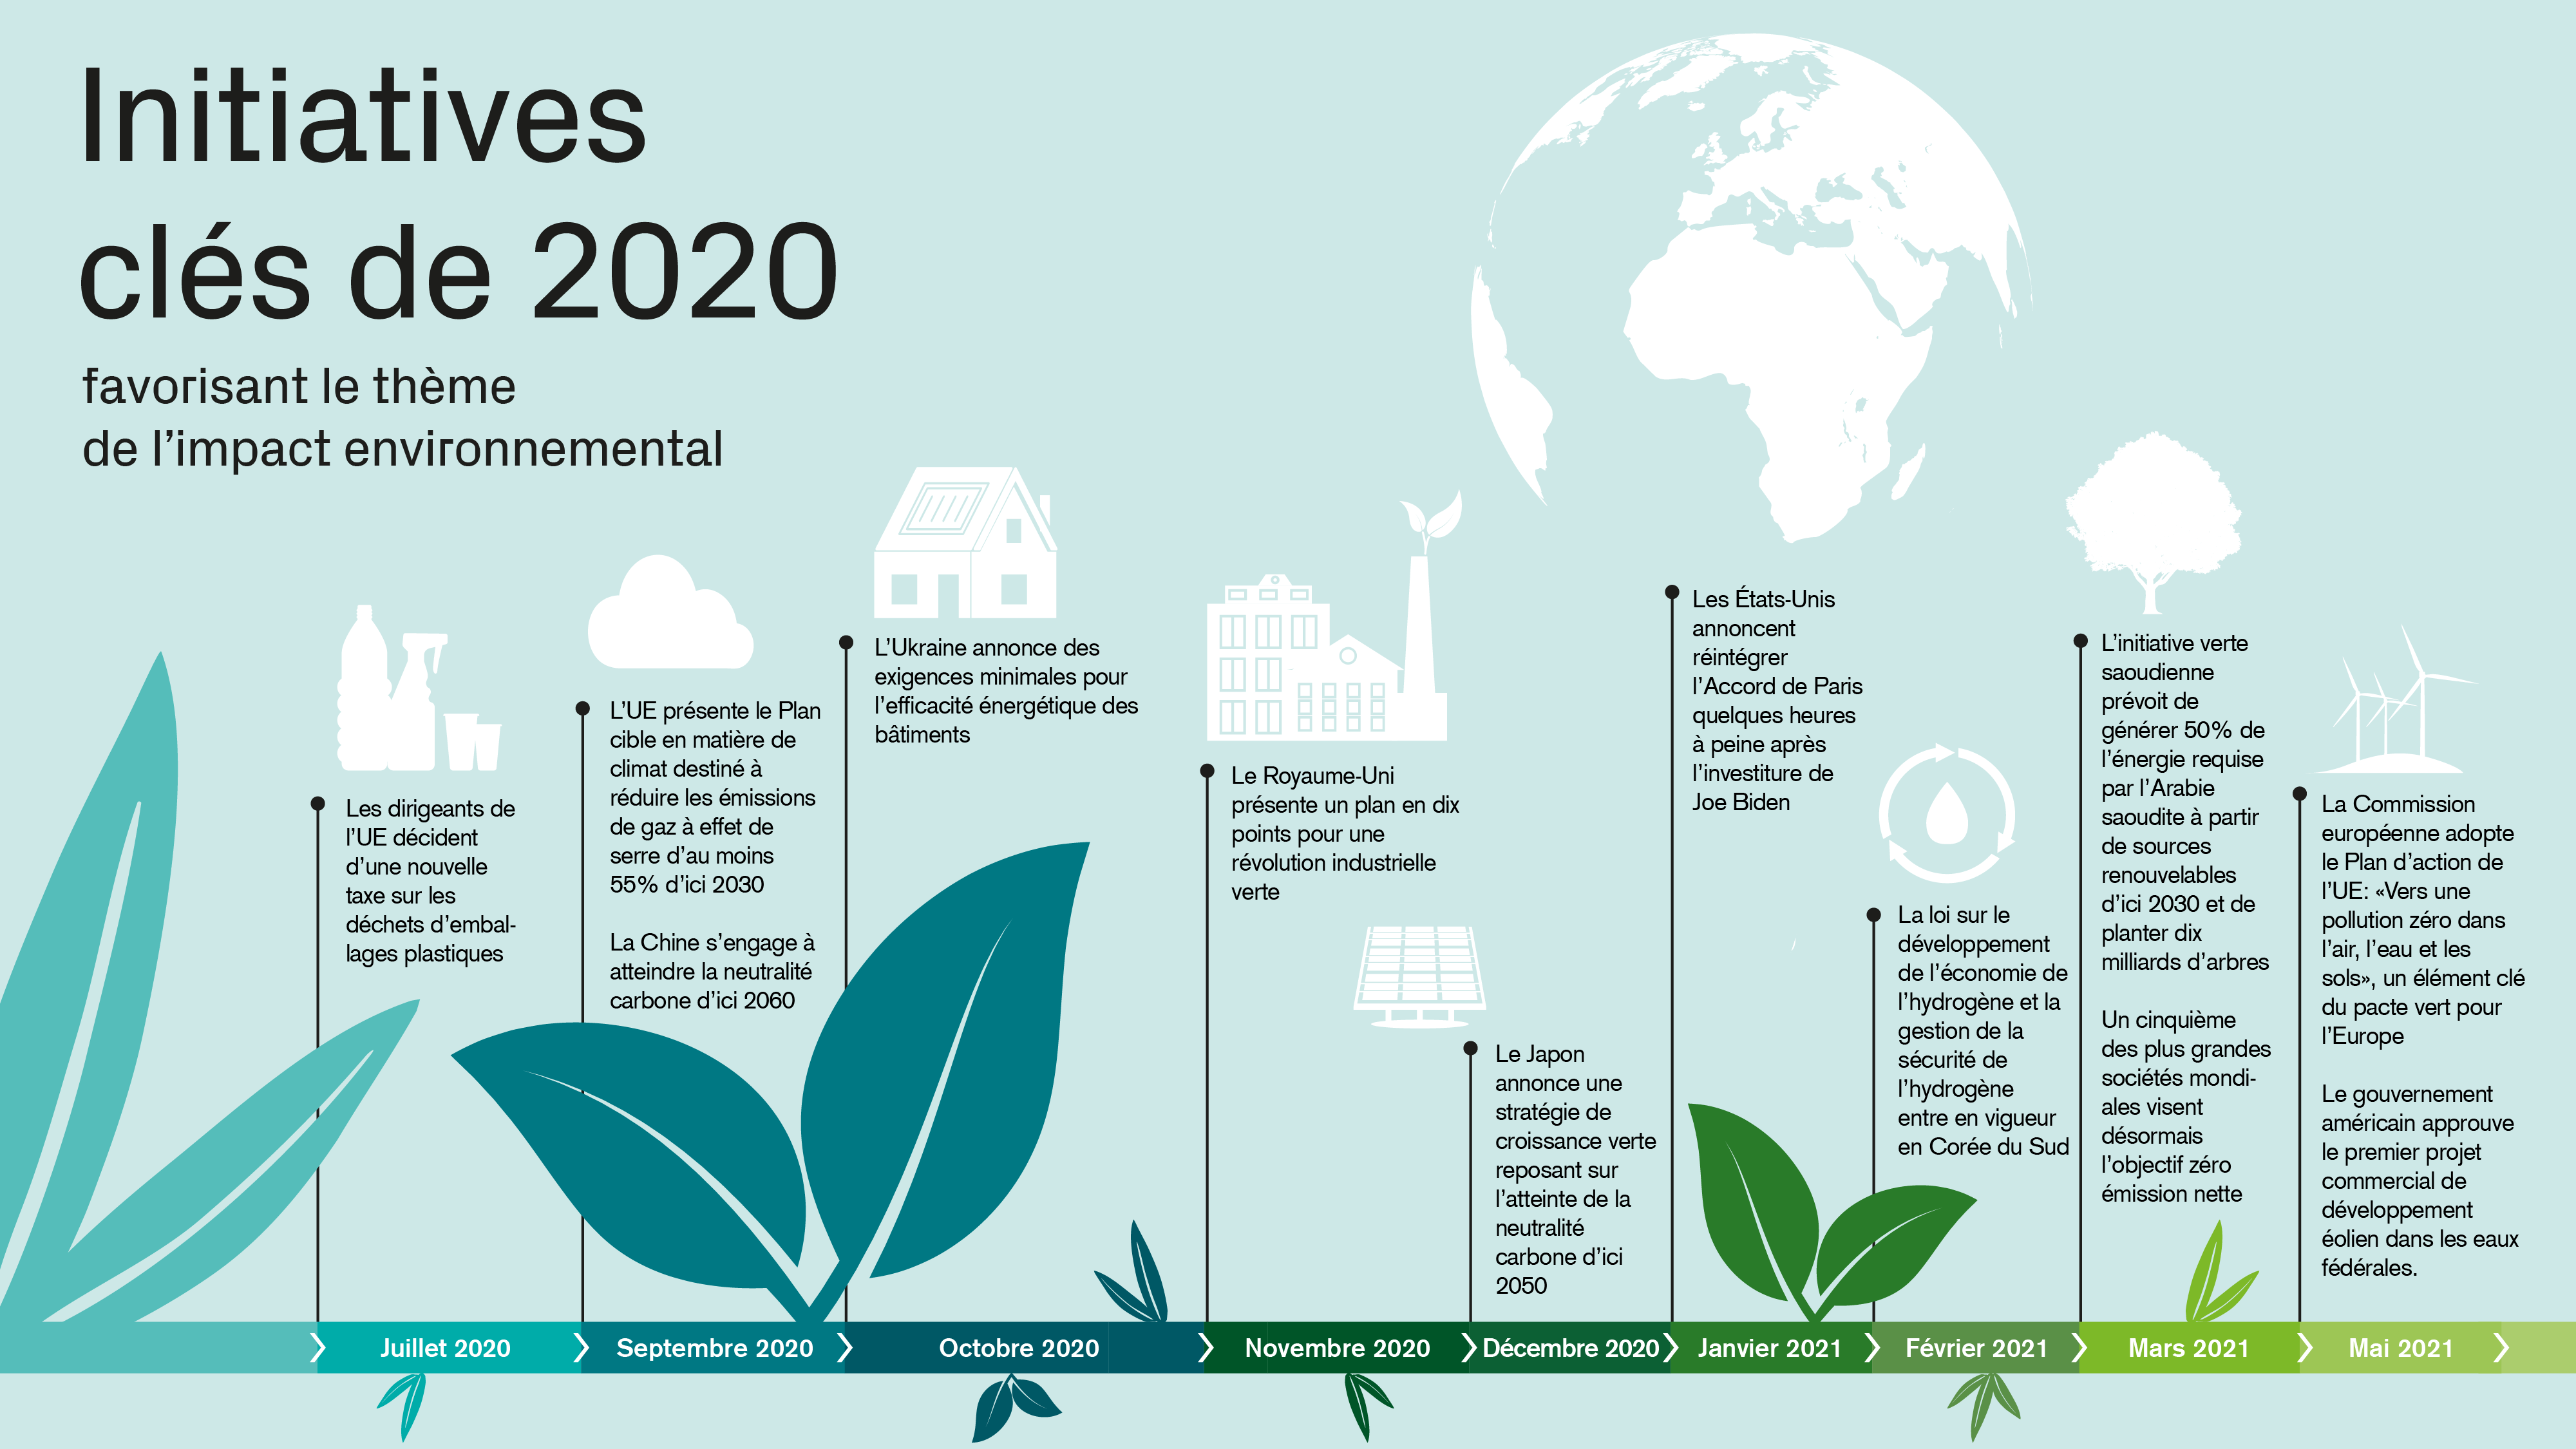 Key 2020 initiatives supporting sustainability